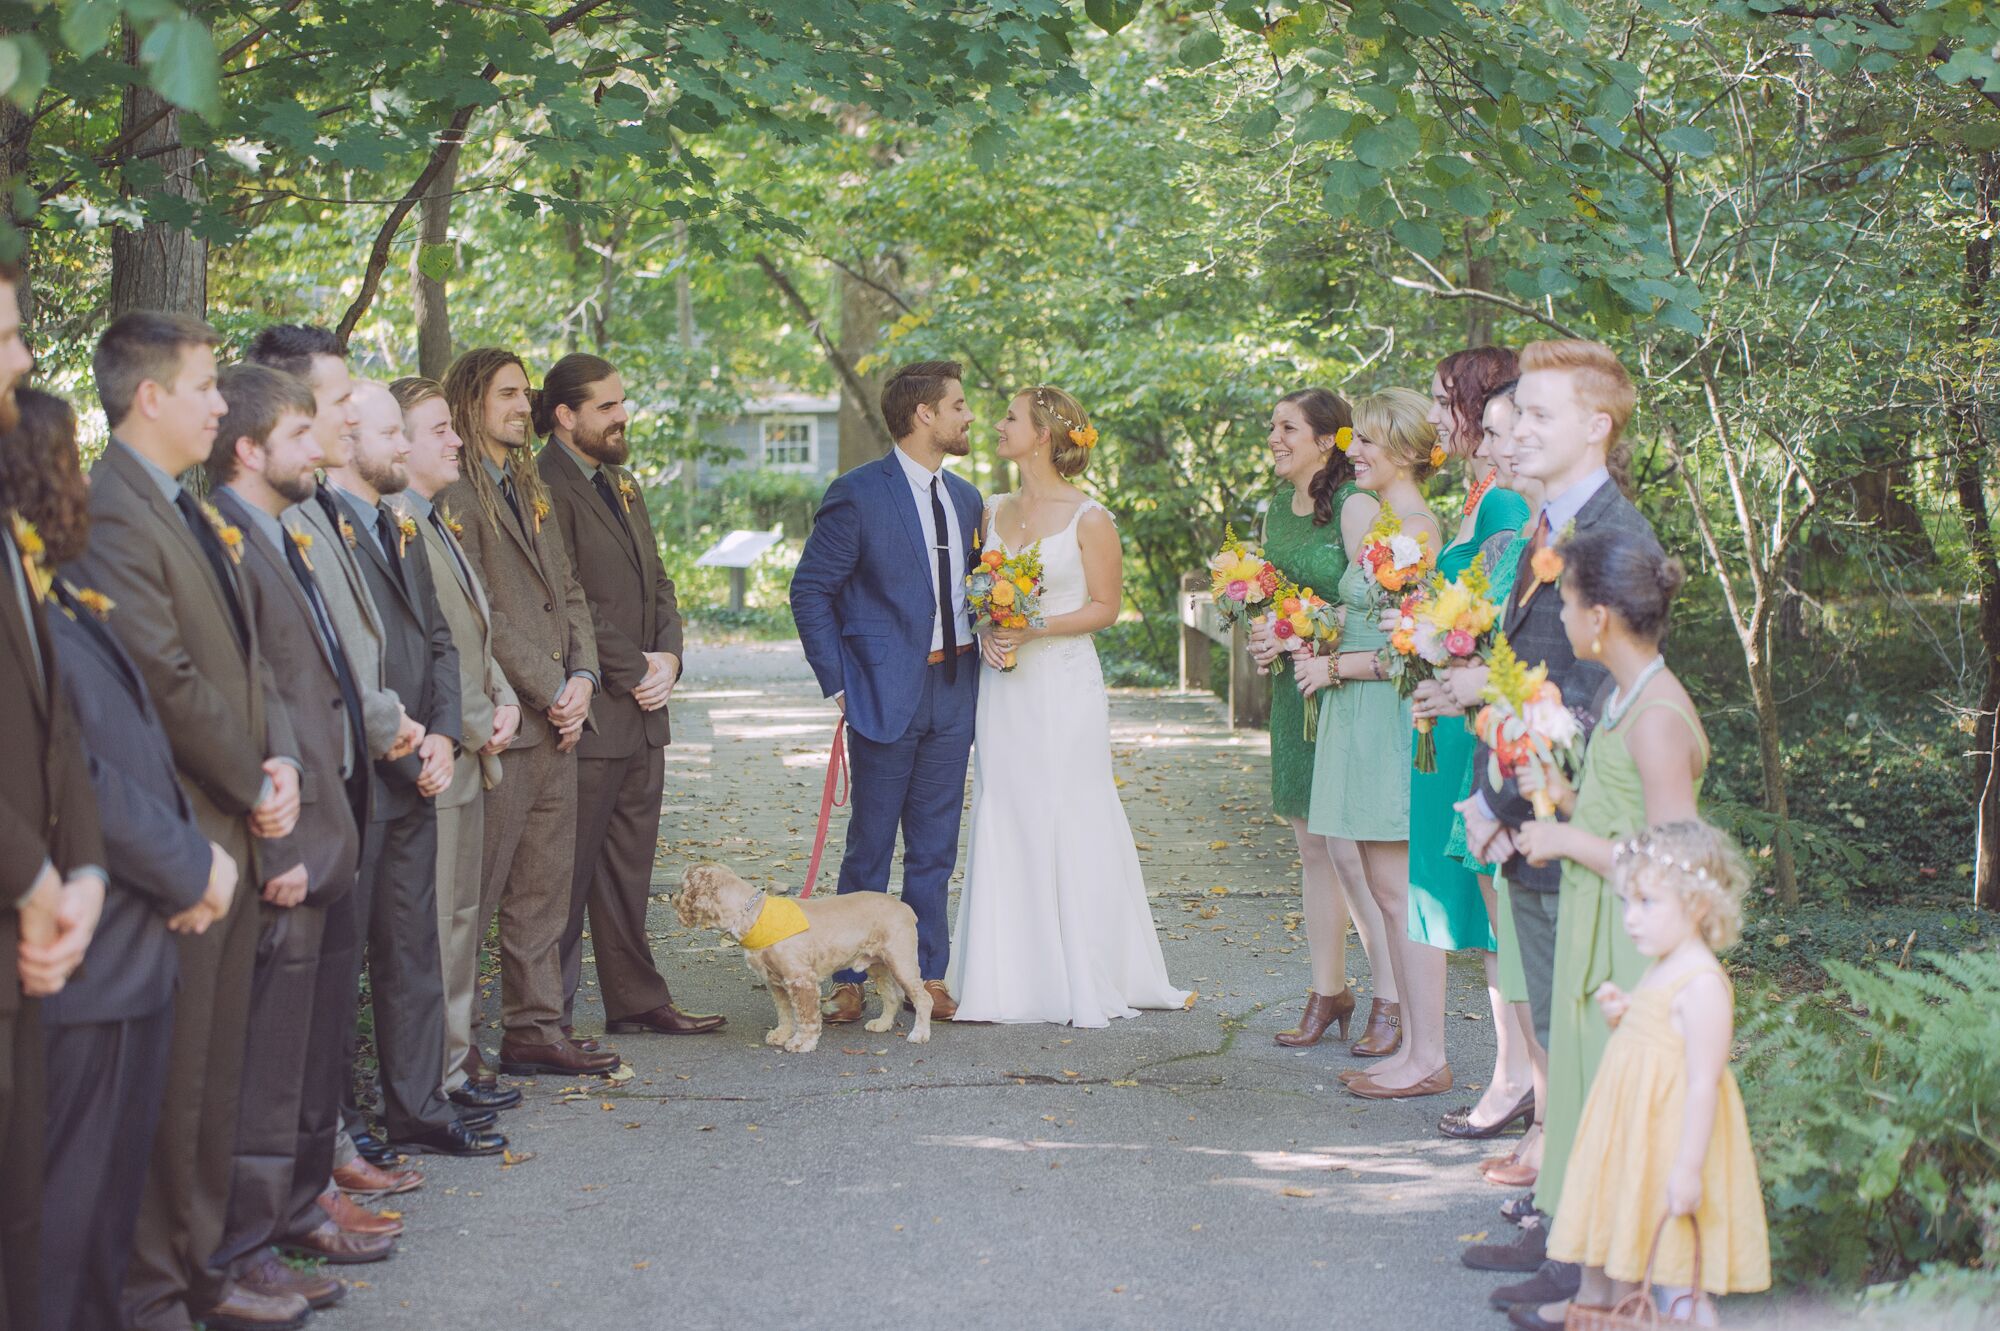 A Rustic Outdoor Wedding At The Fernwood Botanical Gardens In